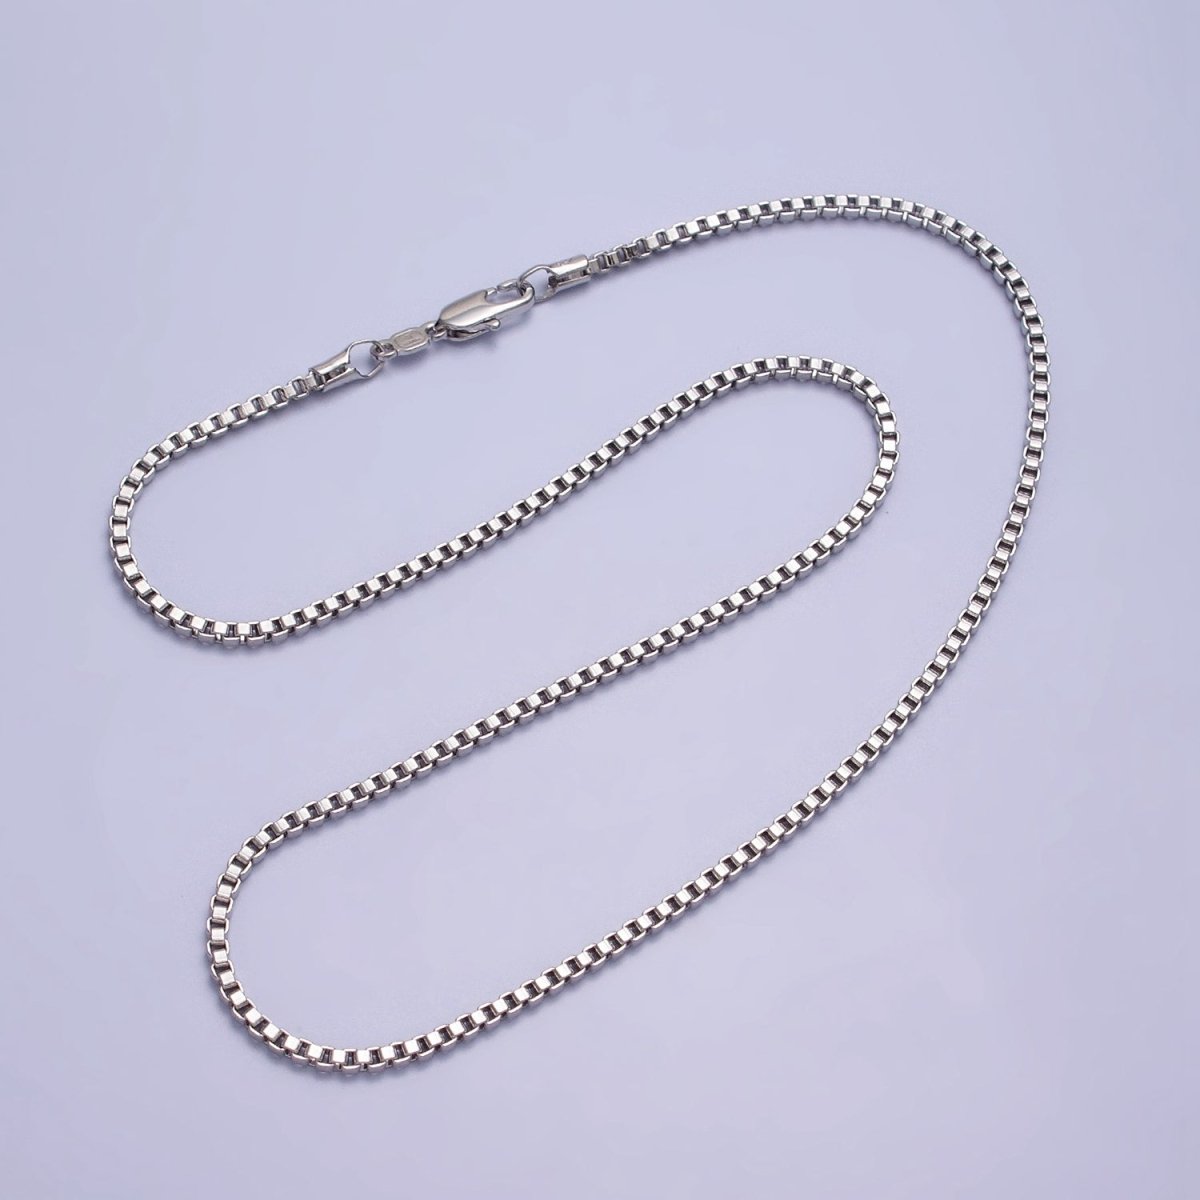 Silver Box Chain Necklace - Unisex 2mm Waterproof Box Necklace, Minimalist Gifts for Men, Women Ready to Wear Chain for Gift | WA-1547 Clearance Pricing - DLUXCA